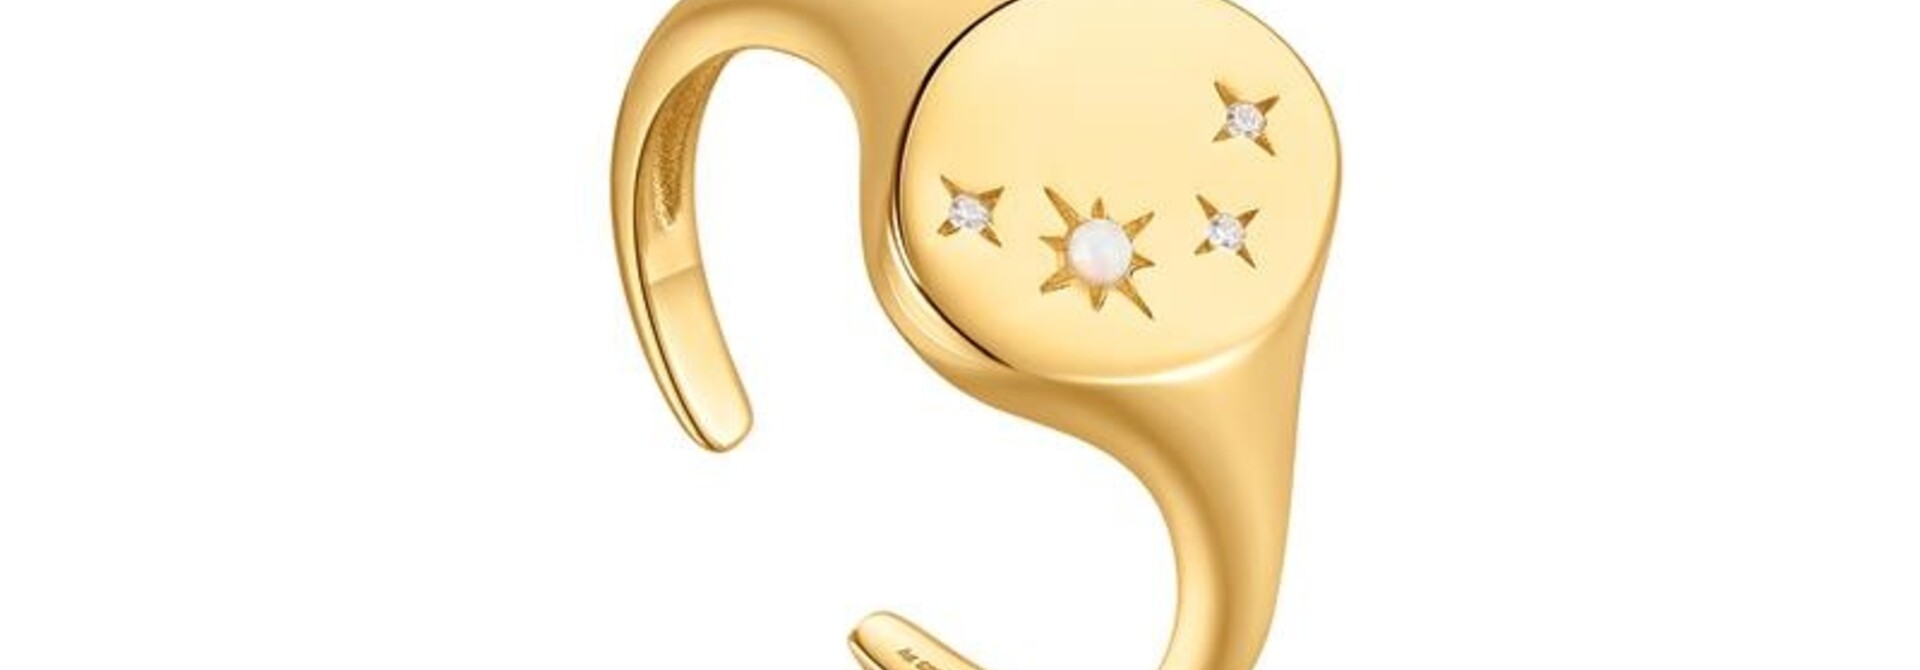 Starry Kyoto Opal Adjustable Signet Ring - Gold plated